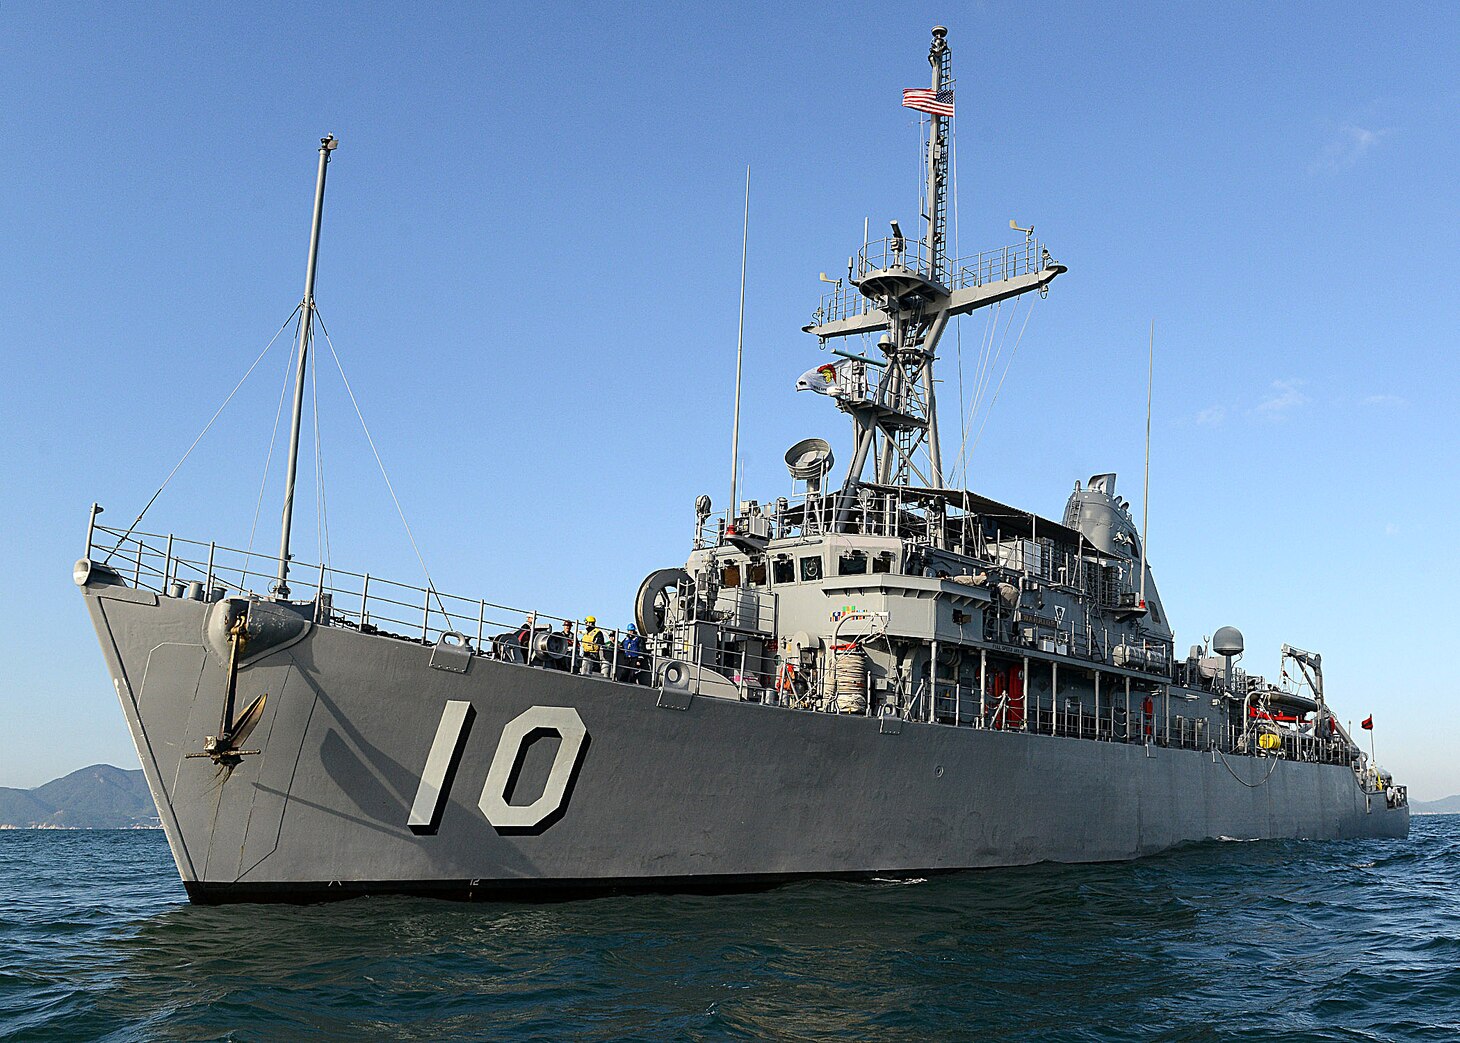 The mine countermeasures ship USS Warrior (MCM 10) participates in exercise Clear Horizon 2014 off the coast of the Korean Peninsula Oct. 23, 2014. Clear Horizon is an annual bilateral exercise between the U.S. and South Korean navies designed to enhance cooperation and improve capabilities in mine countermeasure operations. (U.S. Navy photo by Mass Communication Specialist 1st Class Frank L. Andrews/Released)